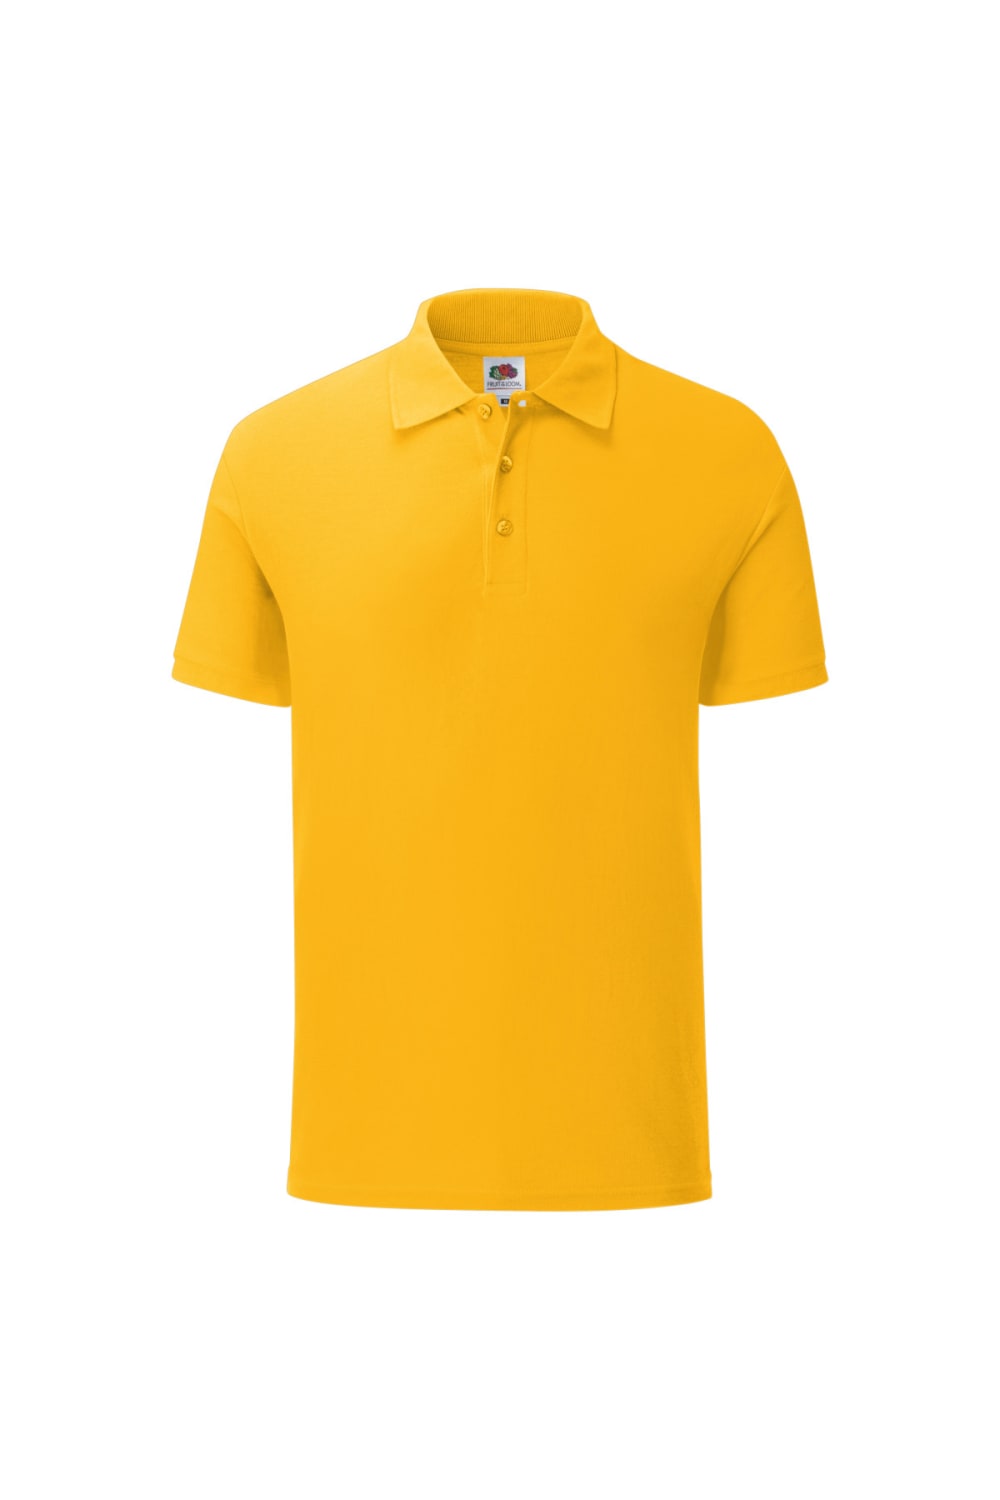 Fruit Of The Loom Mens Iconic Polo Shirt (Sunflower Yellow)